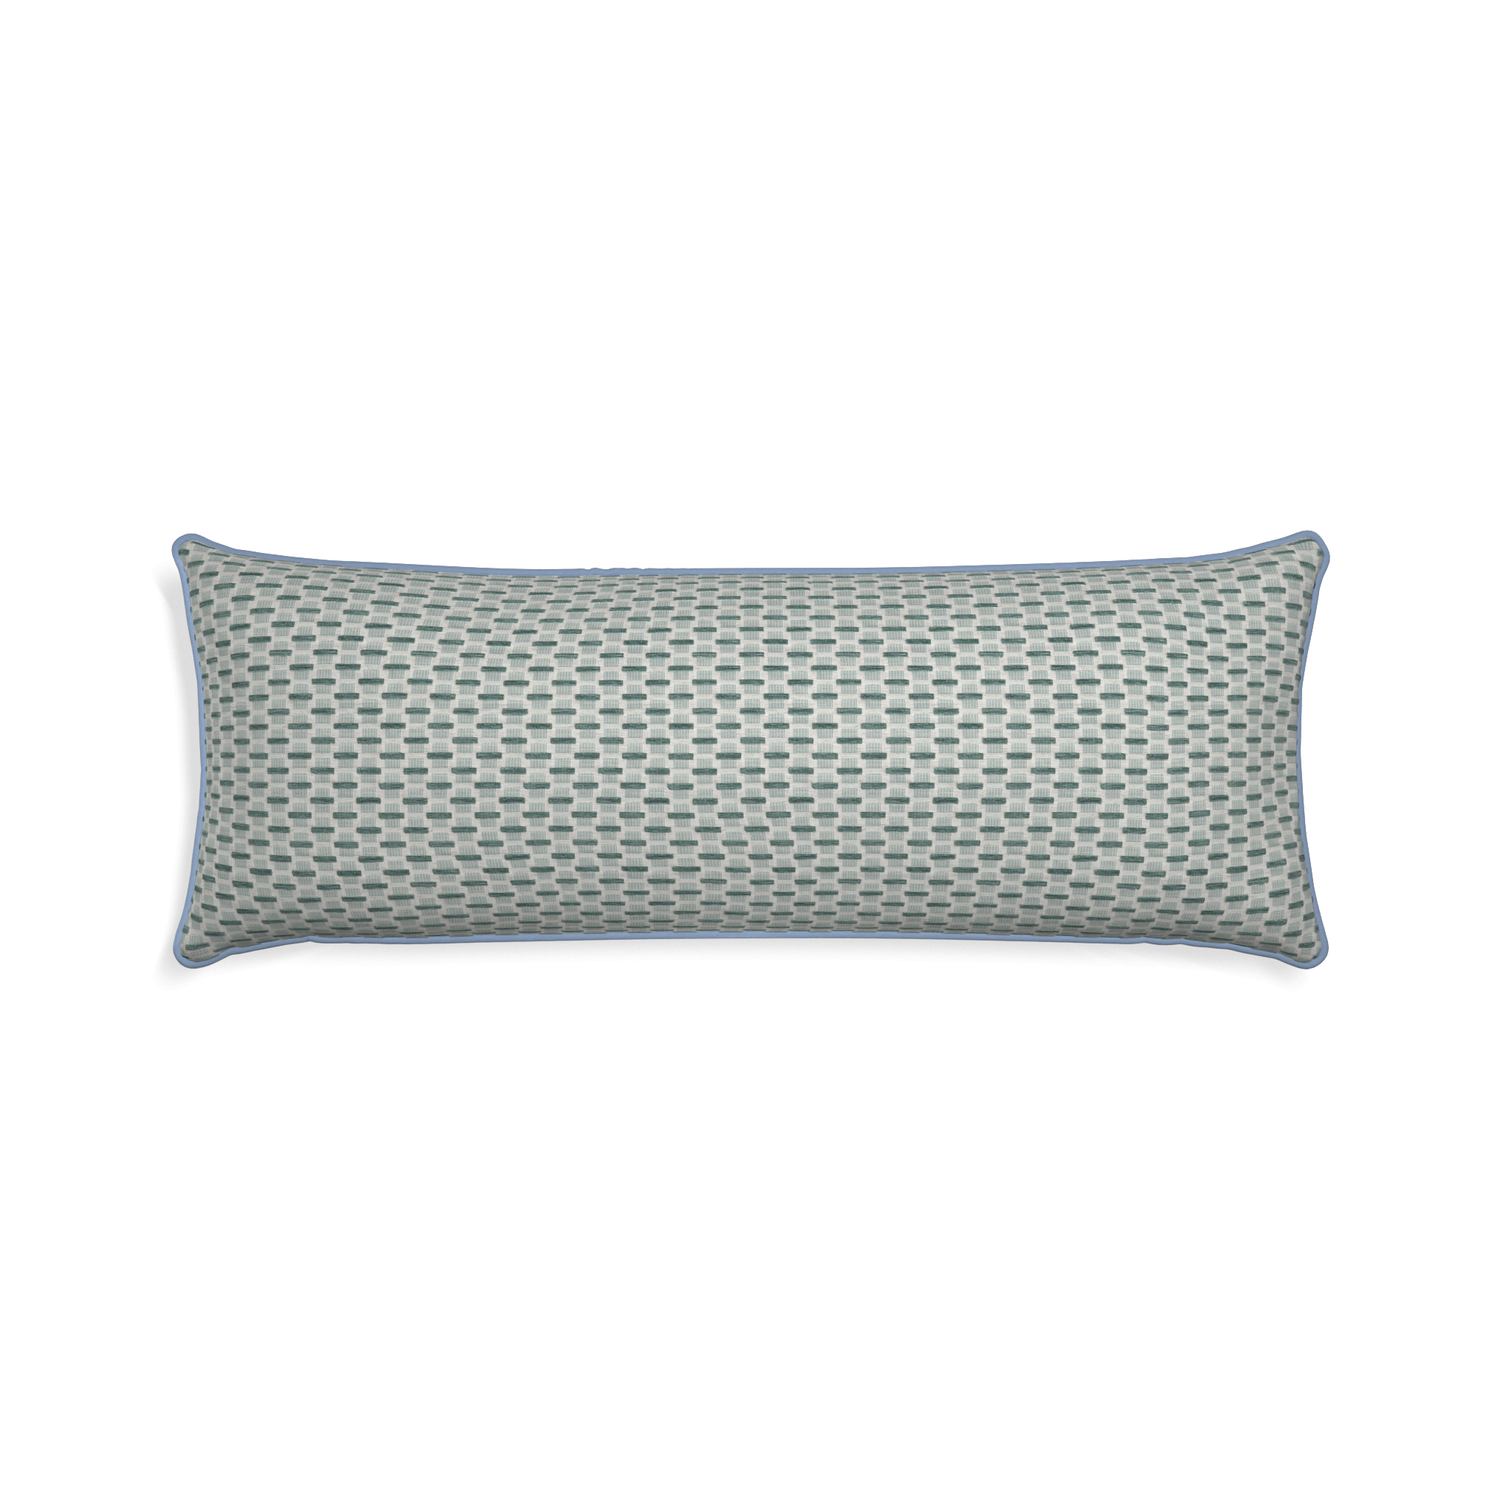 Xl-lumbar willow mint custom green geometric chenillepillow with sky piping on white background